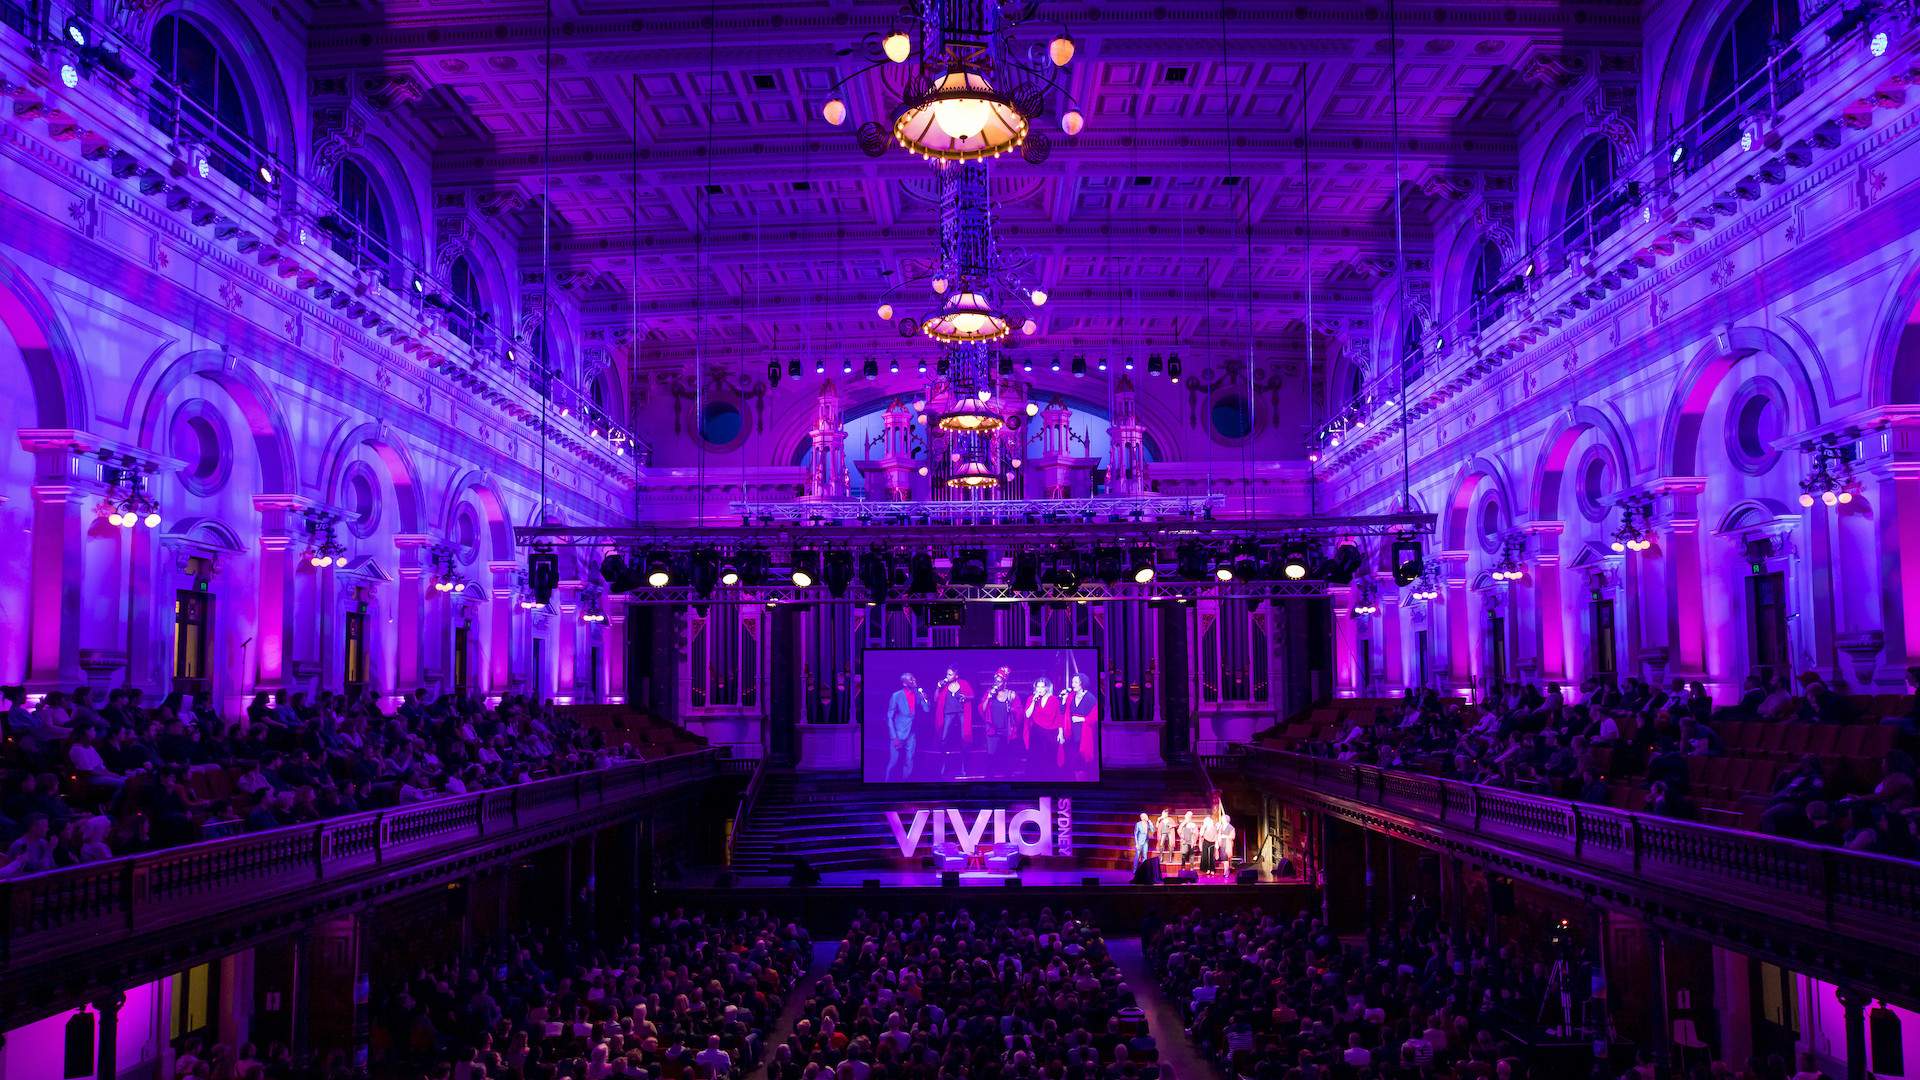 Vivid Has Just Dropped Its Full Lineup of Lights, Music and Ideas for 2021